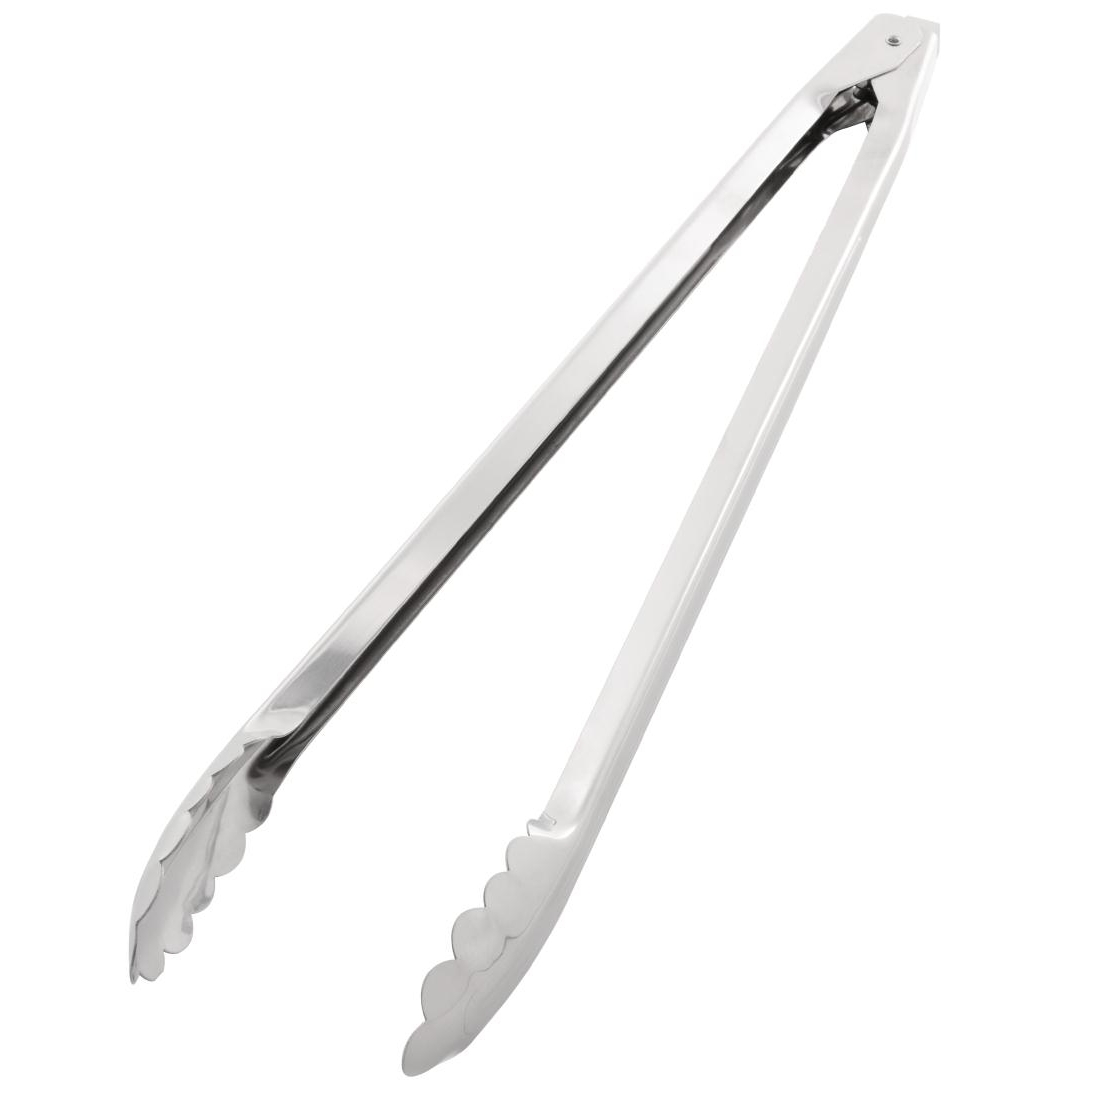 Vogue Catering Tongs 16"